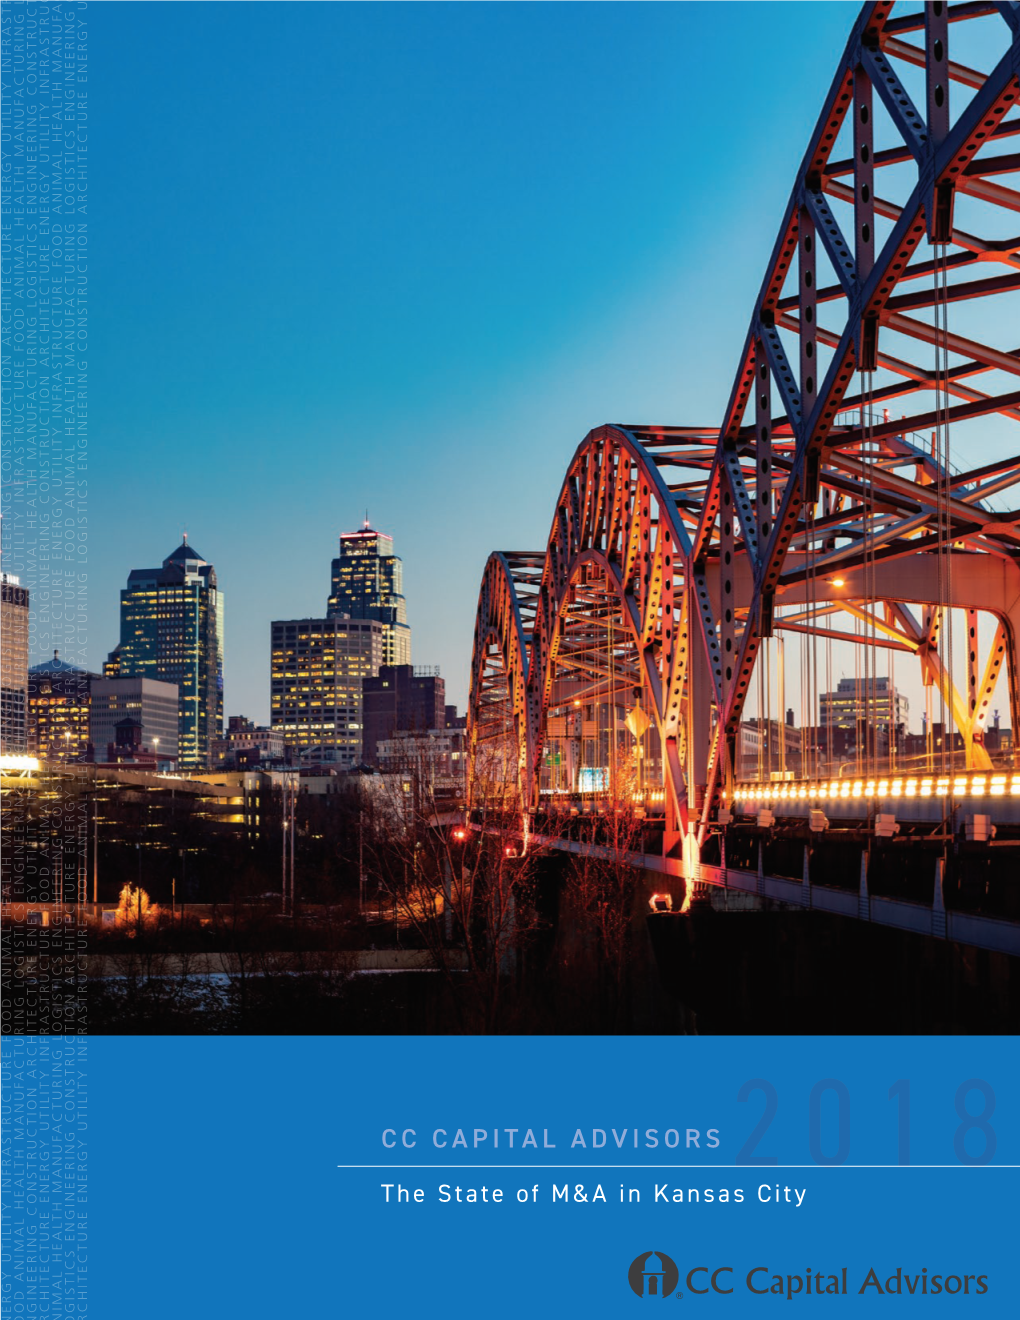 CC CAPITAL ADVISORS 2018 the State of M&A in Kansas City